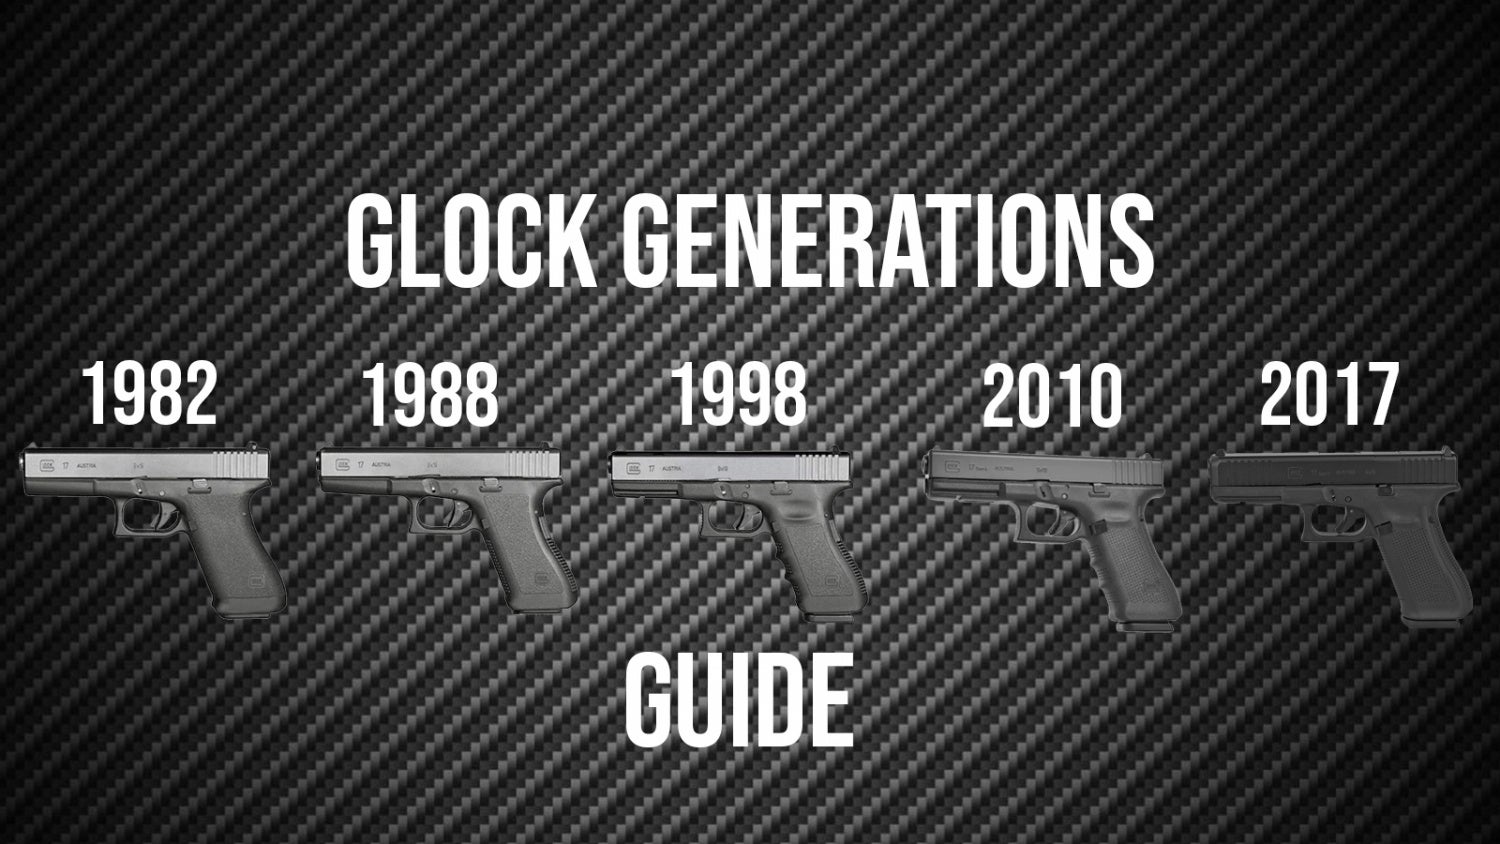 Difference between glock 20 generations in the workplace bitcoin bgp hijacking